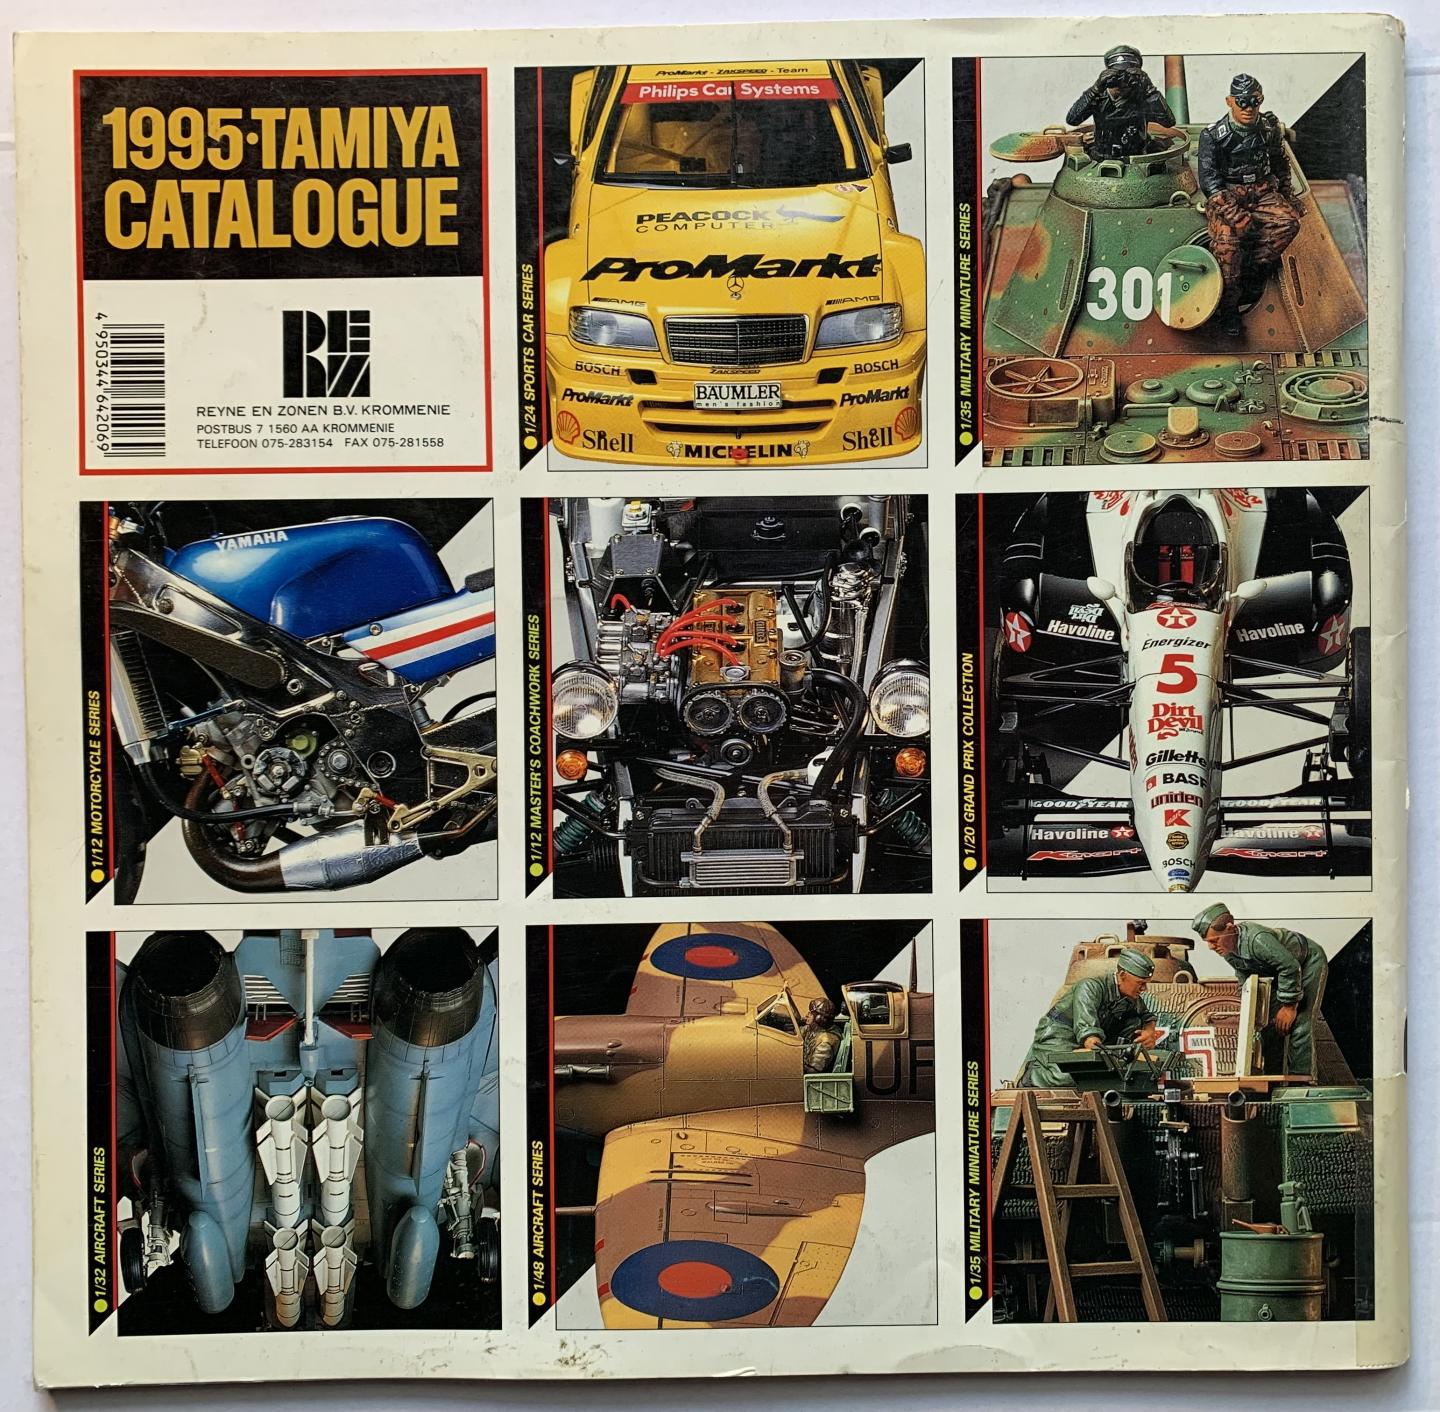 N.N. - 1995. Tamiya Catalogue. Showcase Collection precise scale model kits; armour, aircraft, motorcycles, ships, auto racing classics.